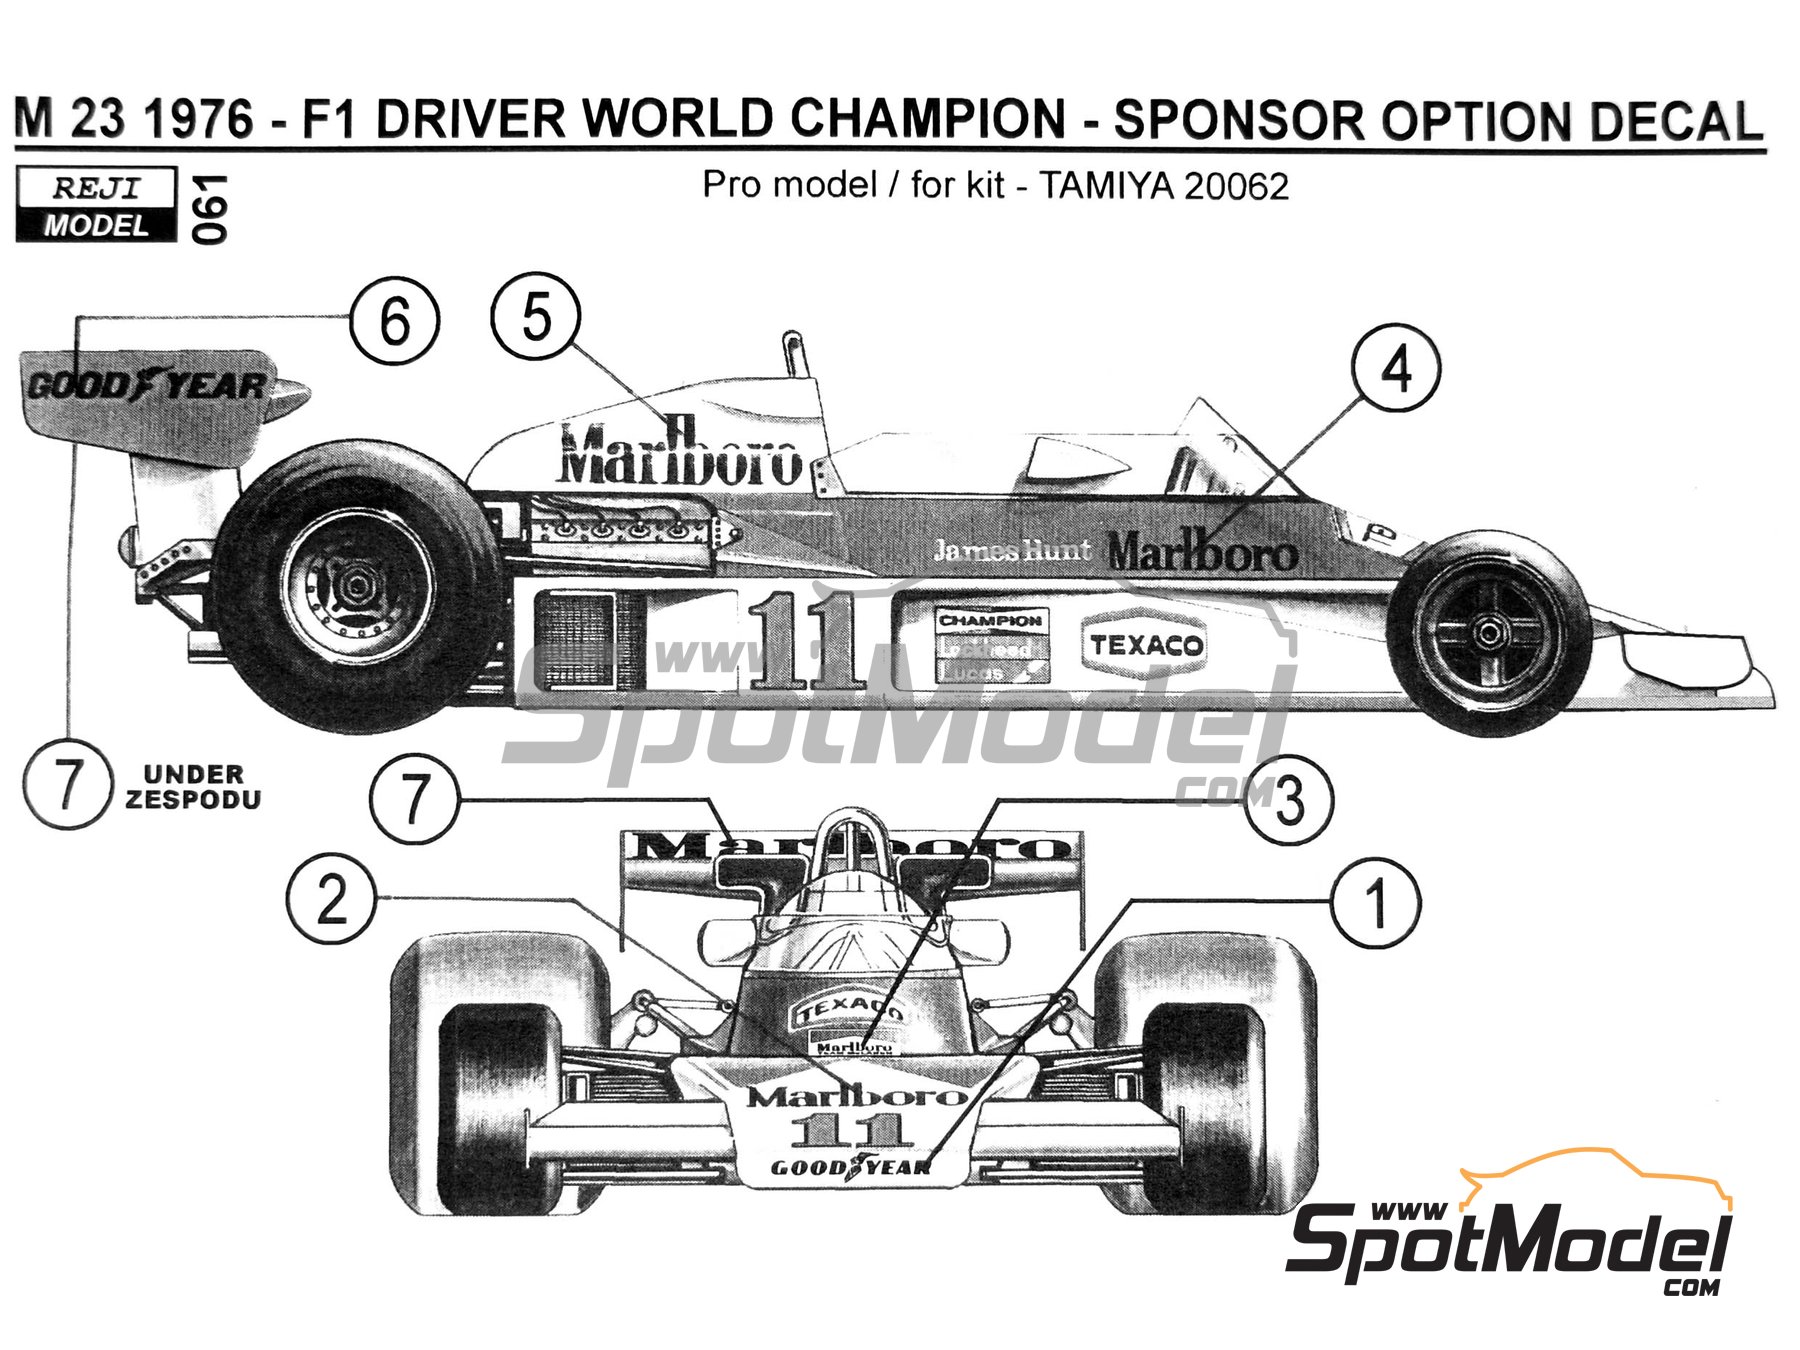 1/12 McLaren Ford M23 Tobacco F1 74' Option Decal for Tamiya